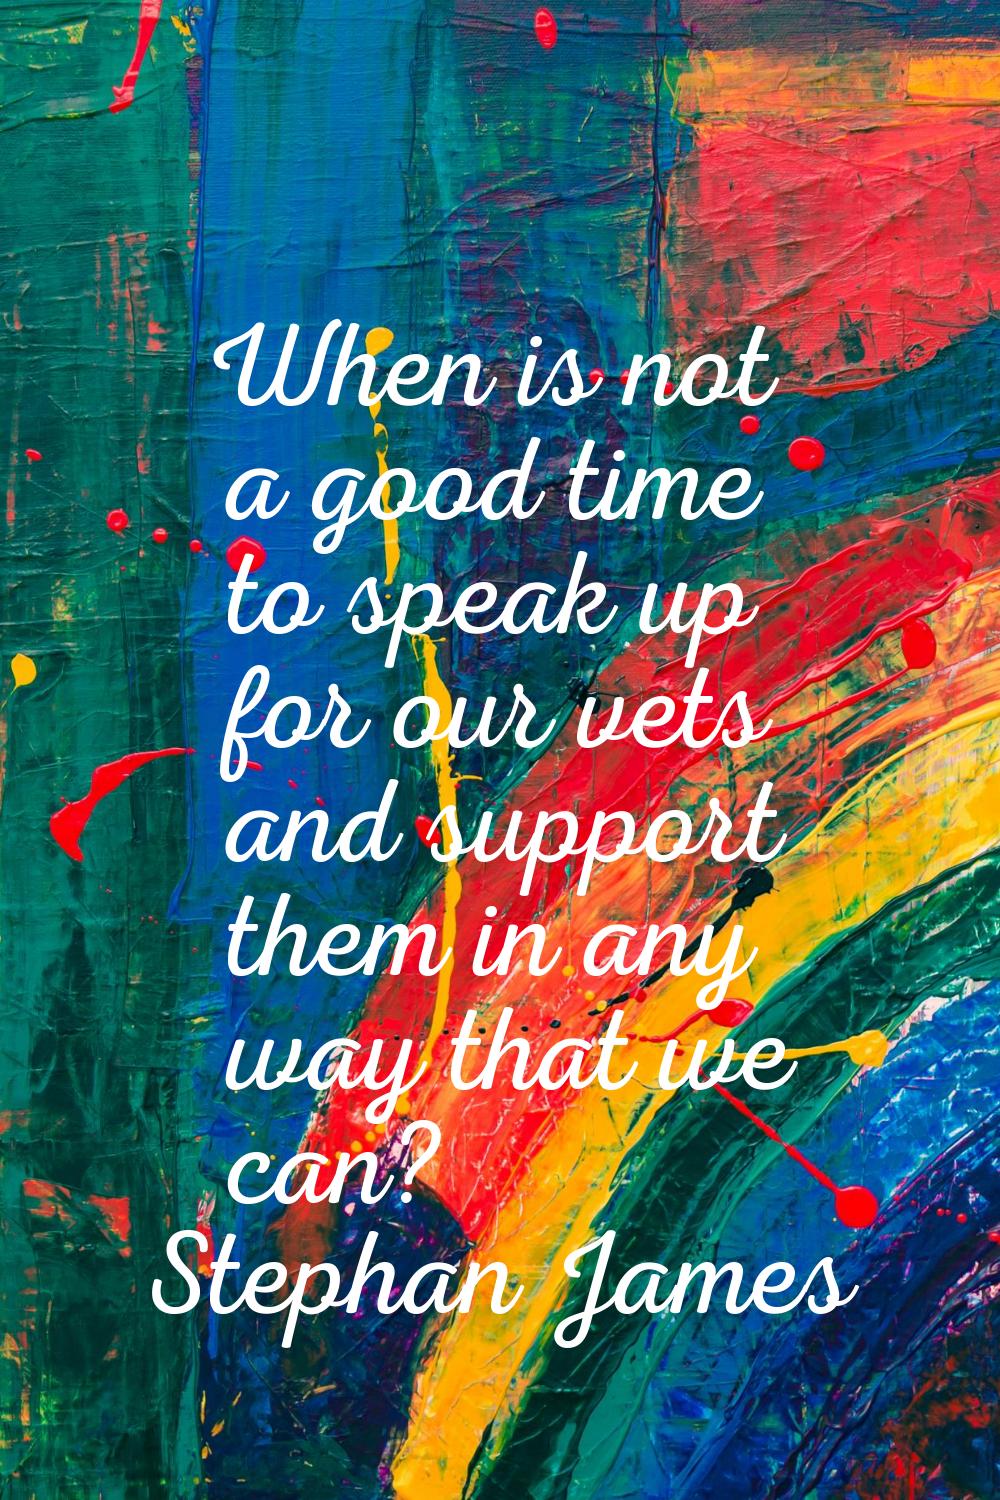 When is not a good time to speak up for our vets and support them in any way that we can?